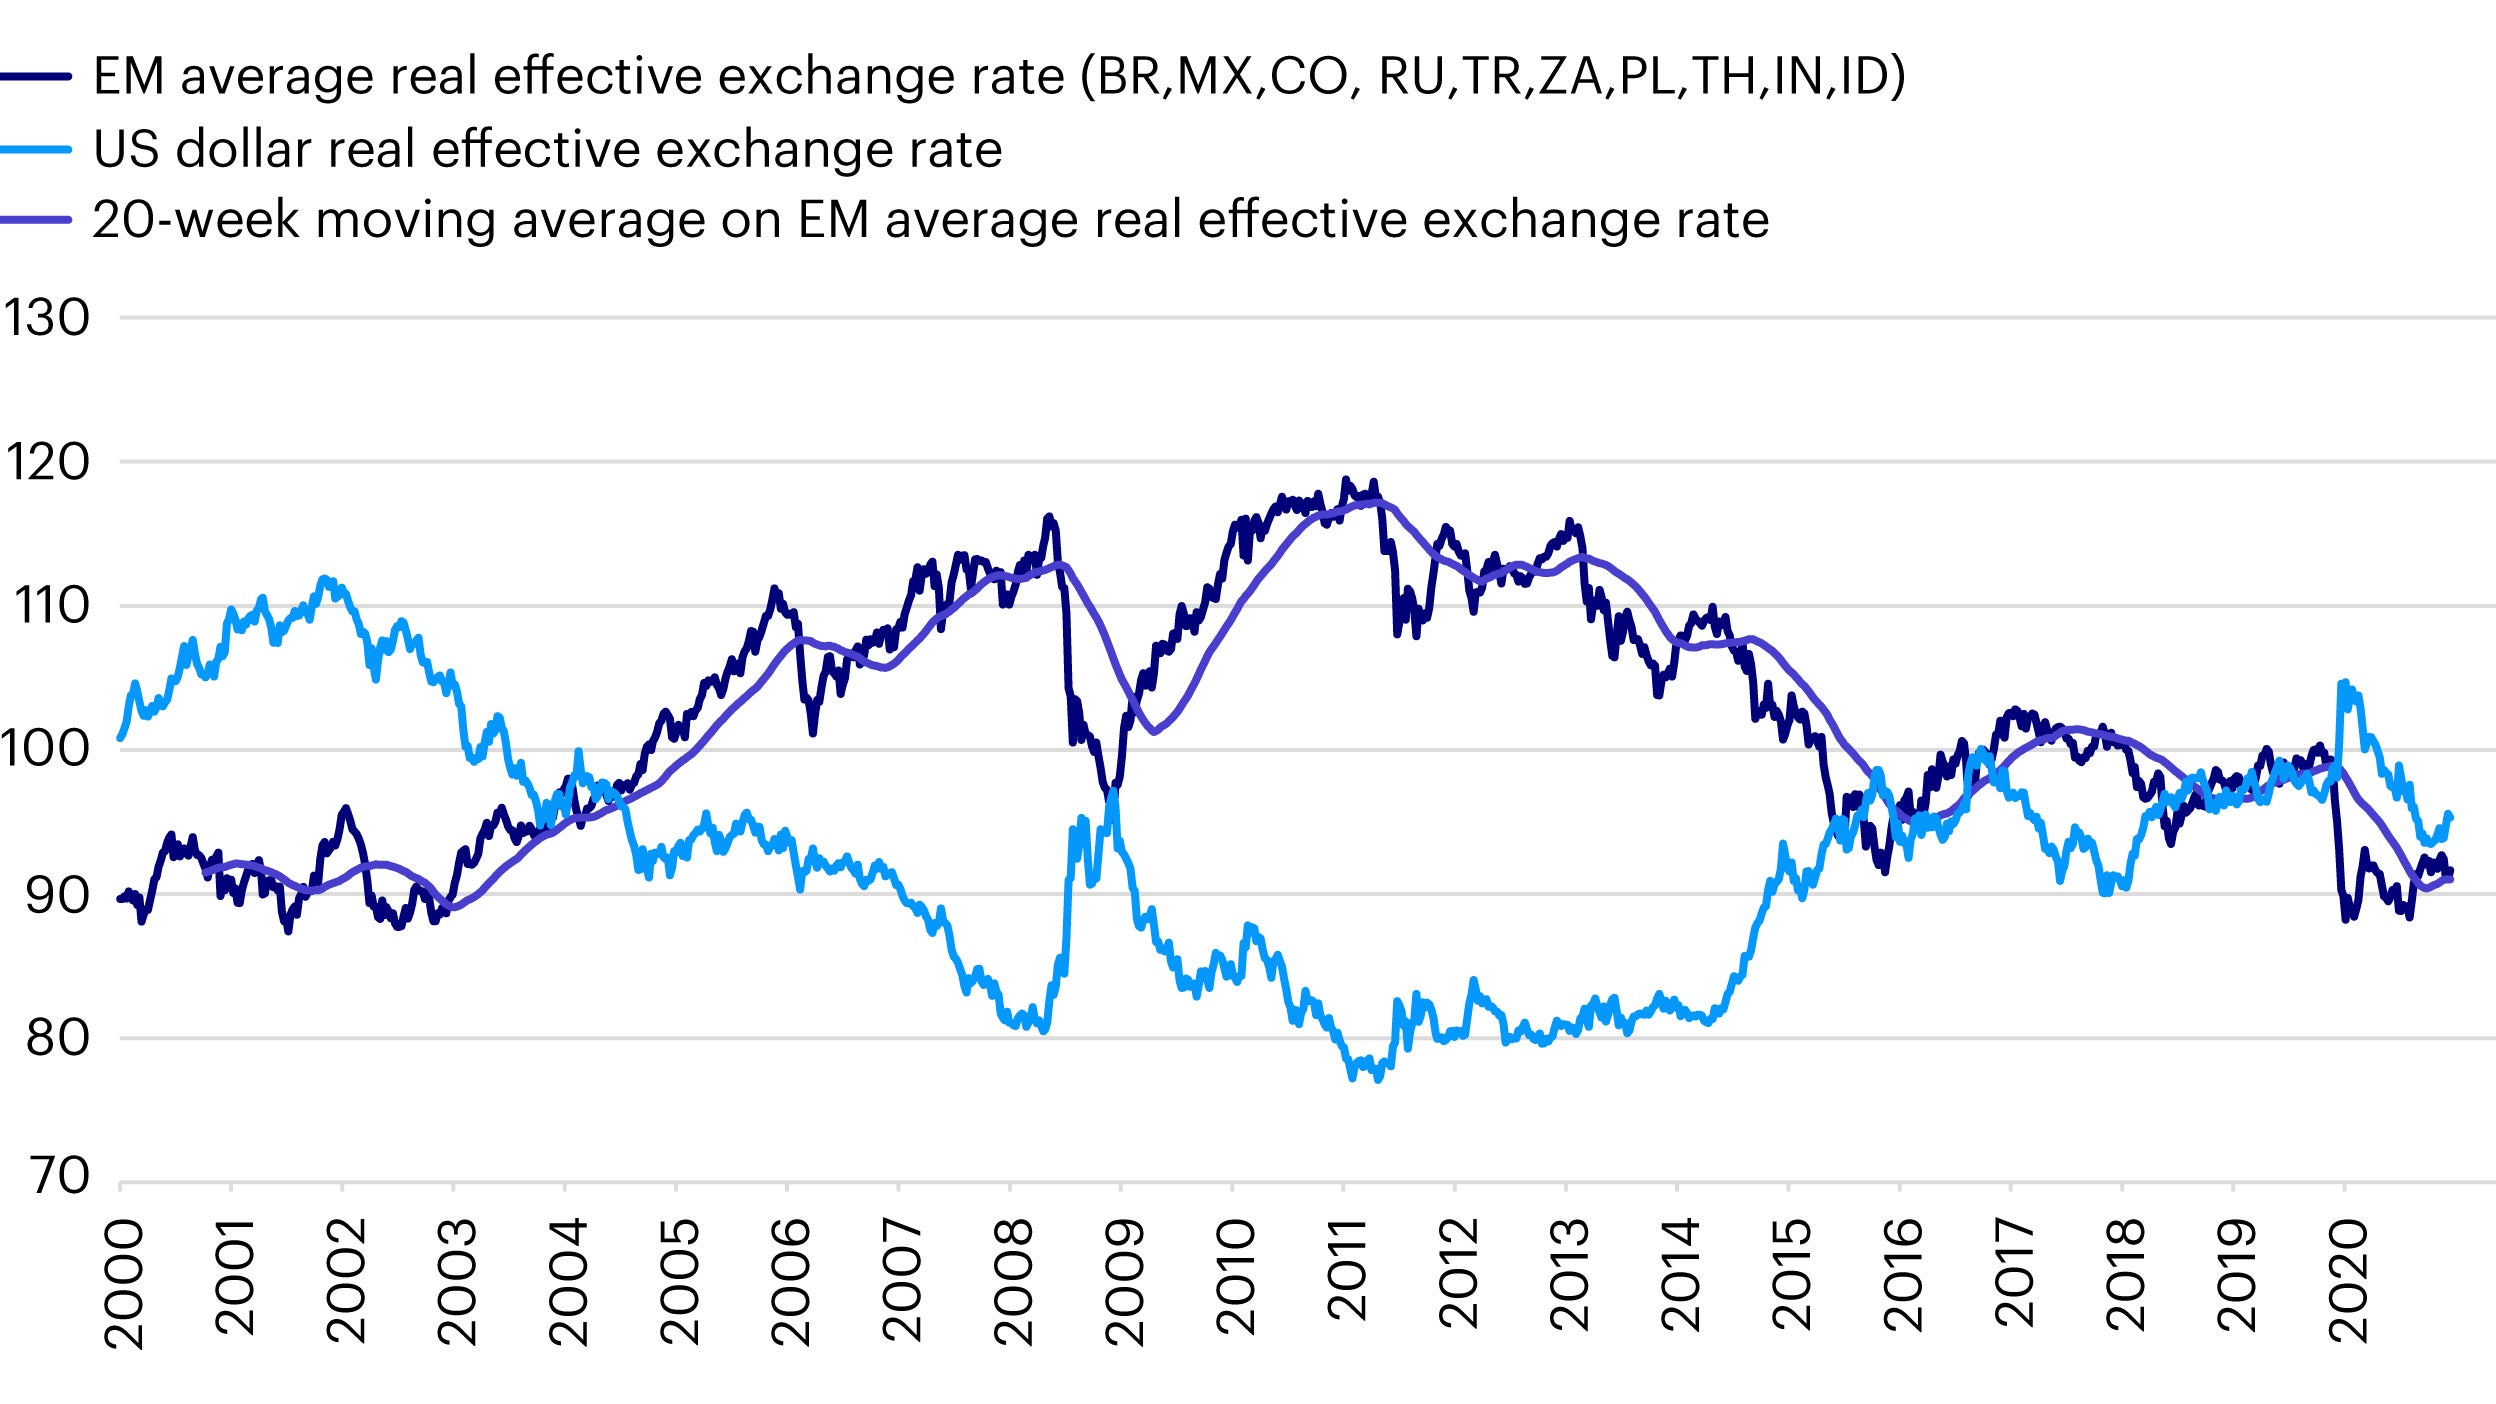 Figure 1. Average real effective exchange rates in emerging markets and the US